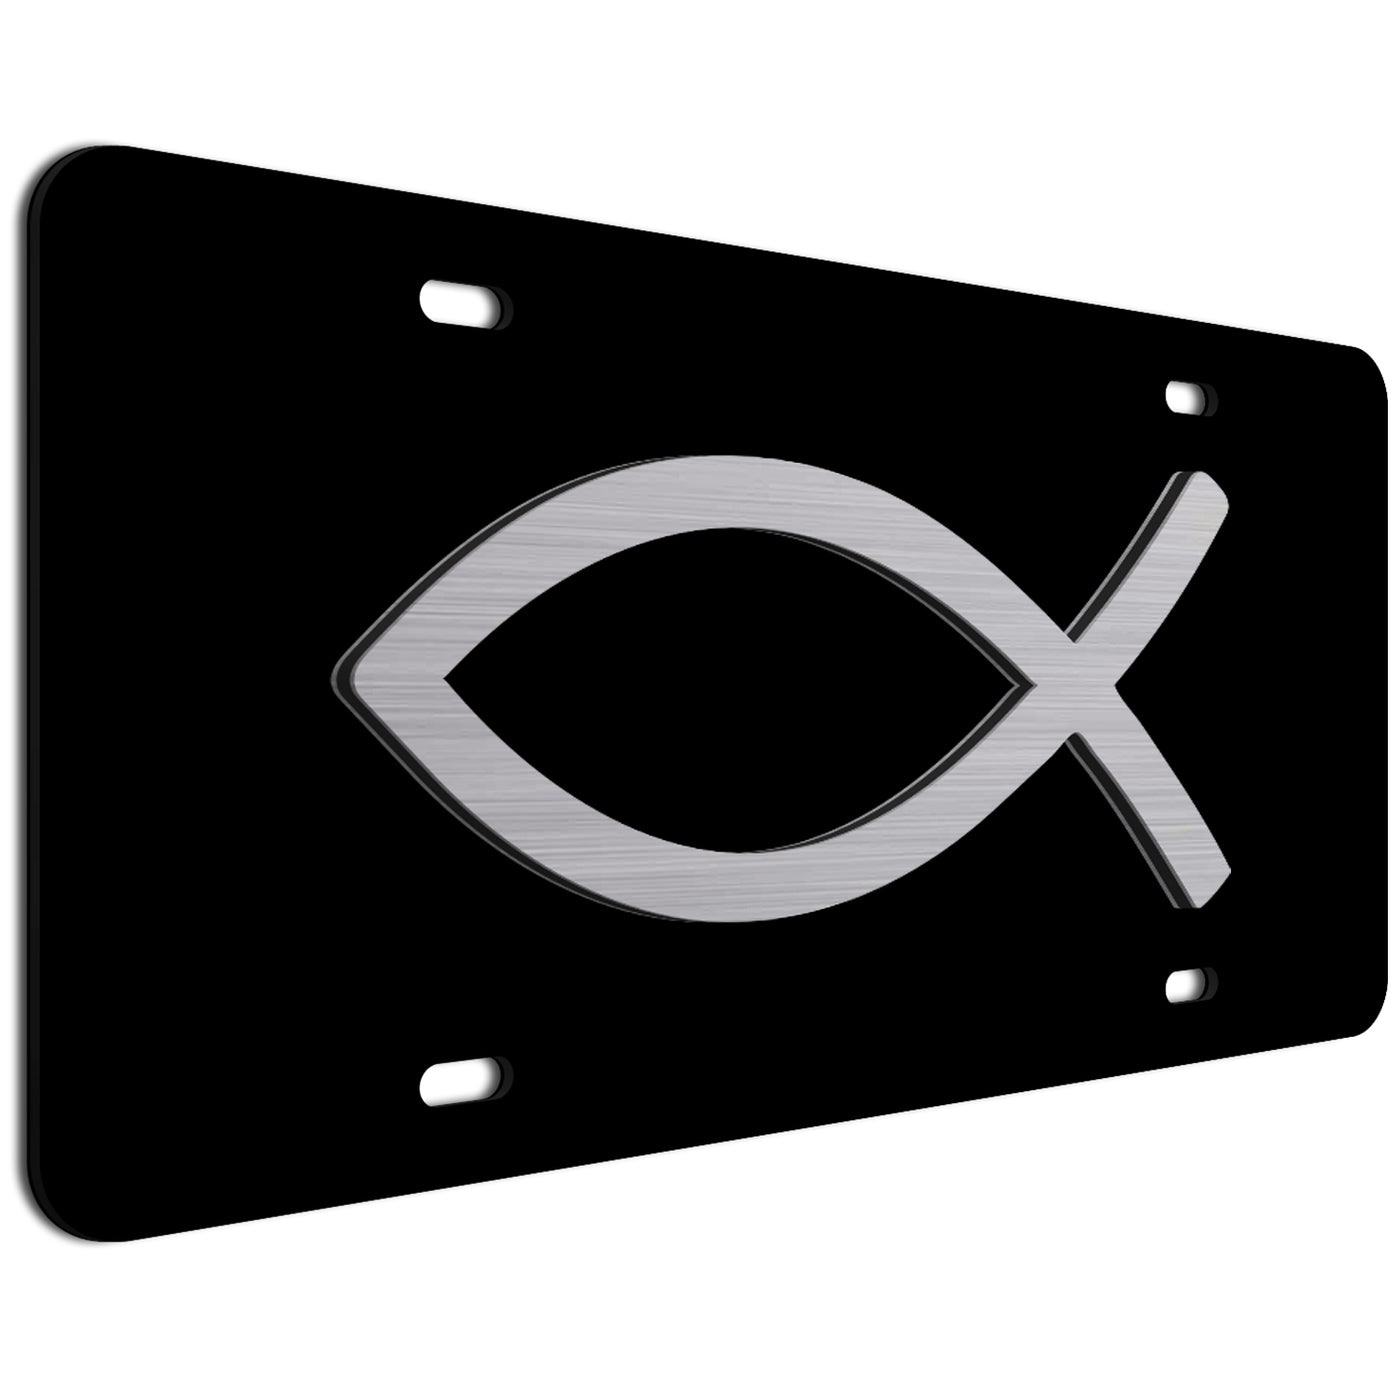 3-D Jesus Fish License Plate | Ichthus car tag | Symbol of Christian Faith | Religious gift